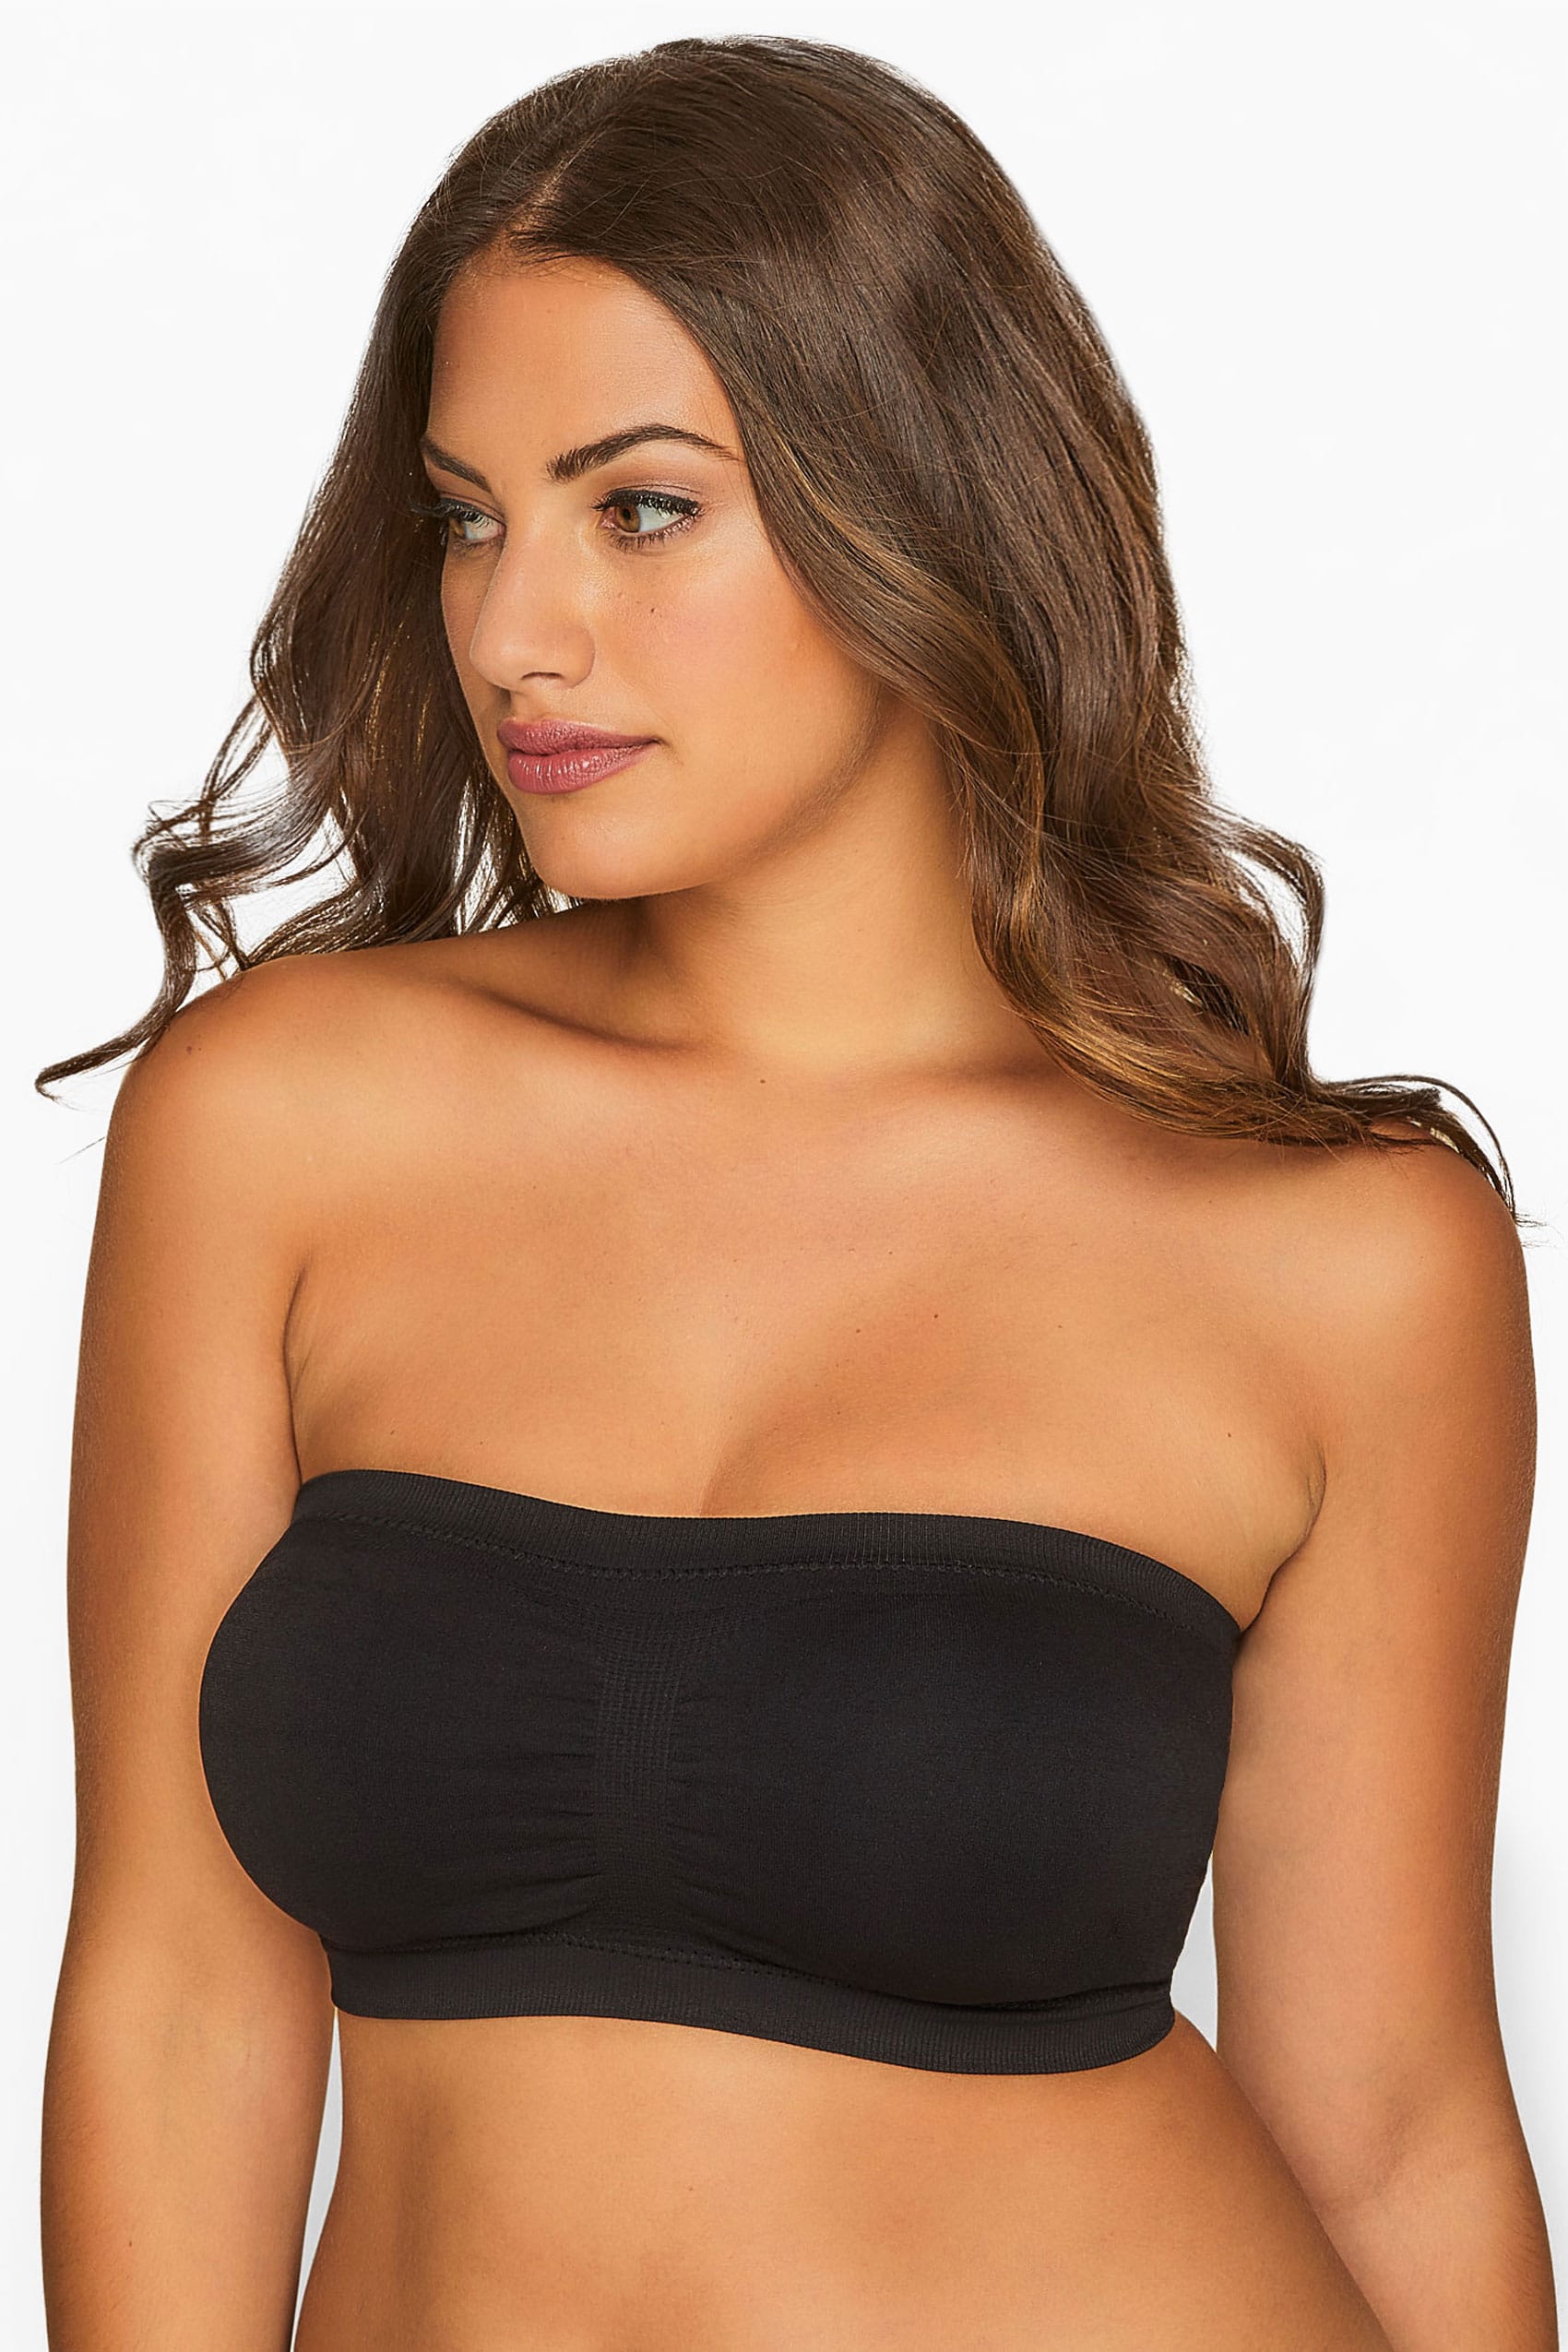 brittle Prevention Pat Plus Size Black Seamless Padded Non-Wired Bandeau Bra | Yours Clothing